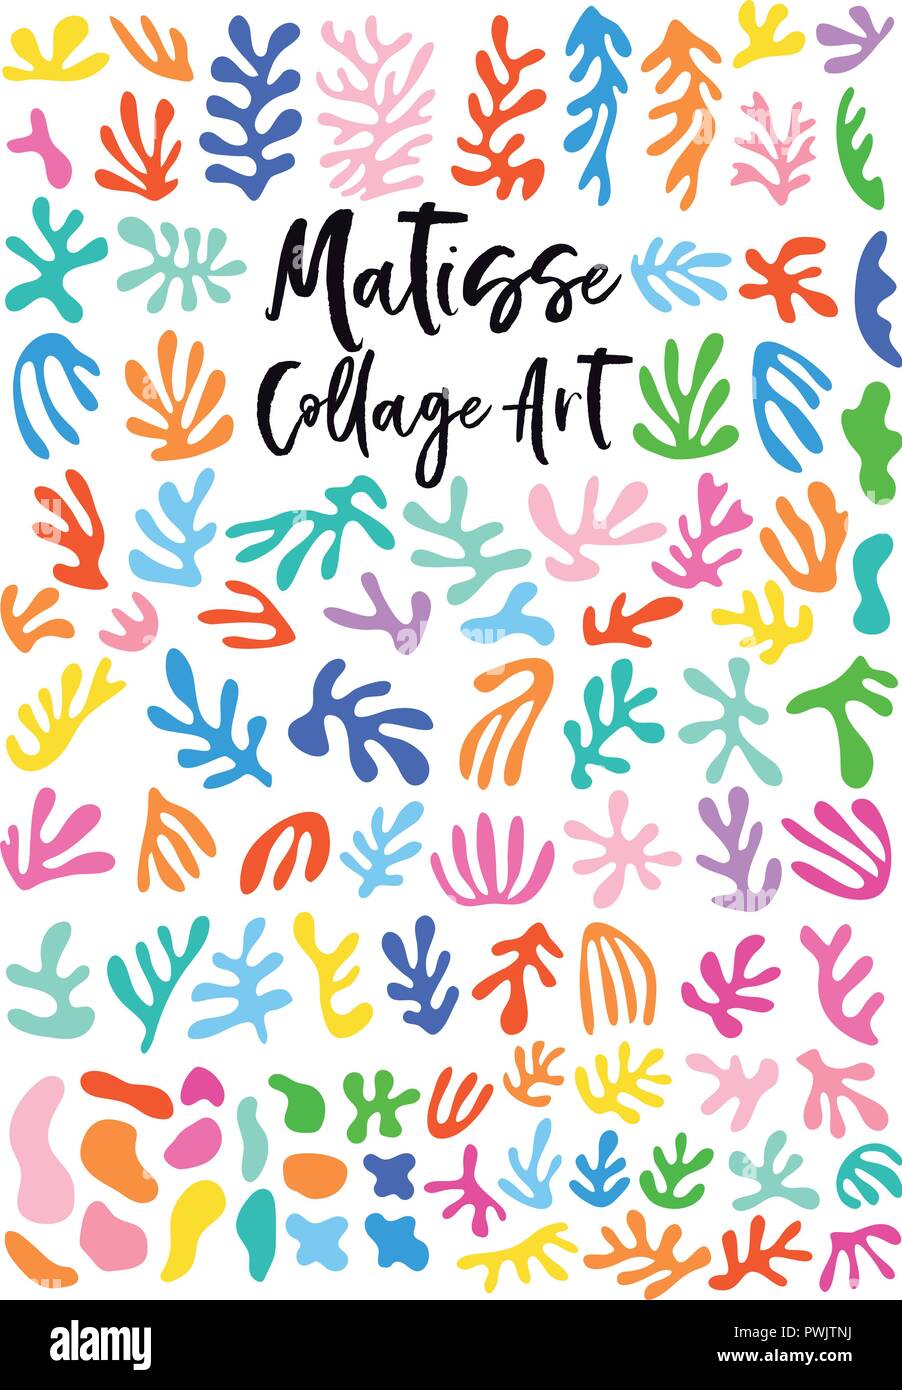 Matisse style collage art, abstract floral cutout shapes, set of vector graphic design elements Stock Vector